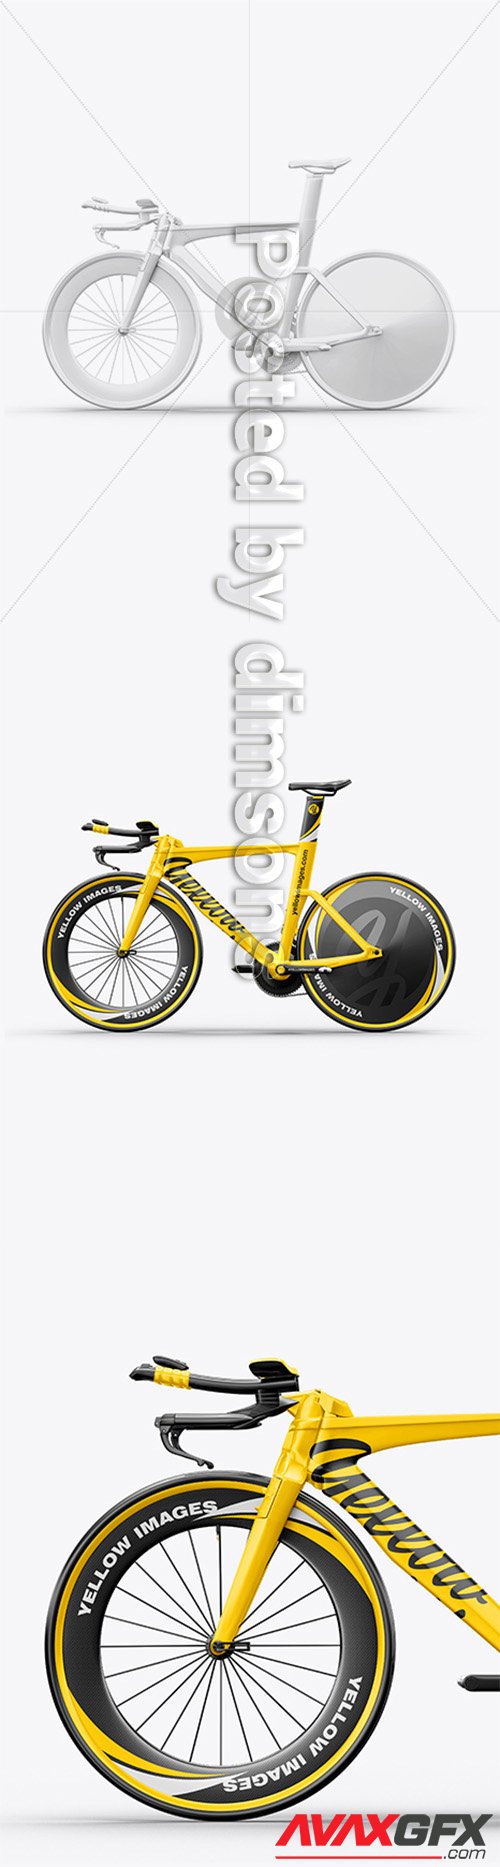 Carbon Triathlon Bicycle Mockup - Left Side View 40618